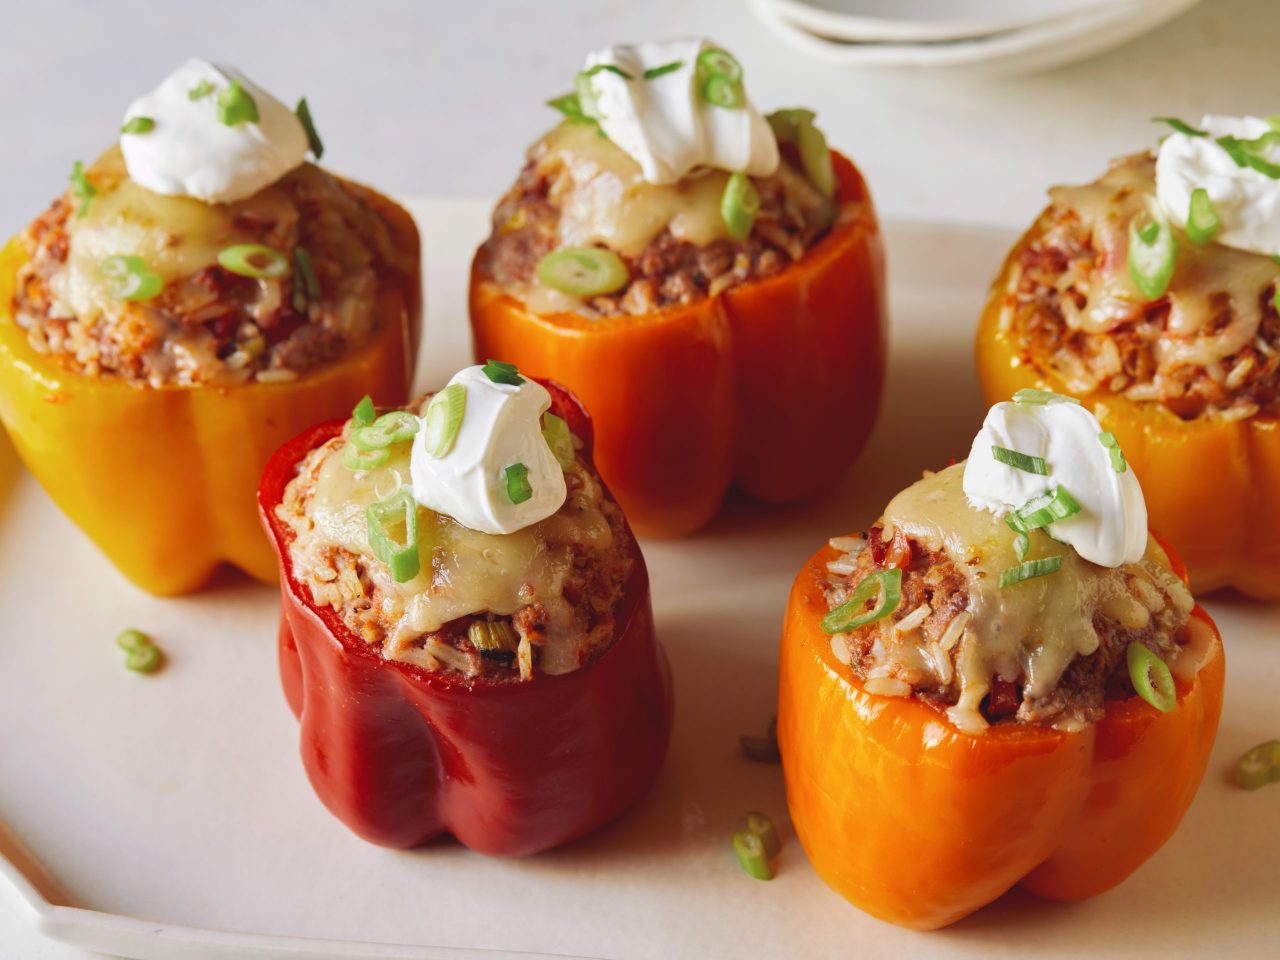 Food Network Kitchen's Slow Cooker Stuffed Peppers